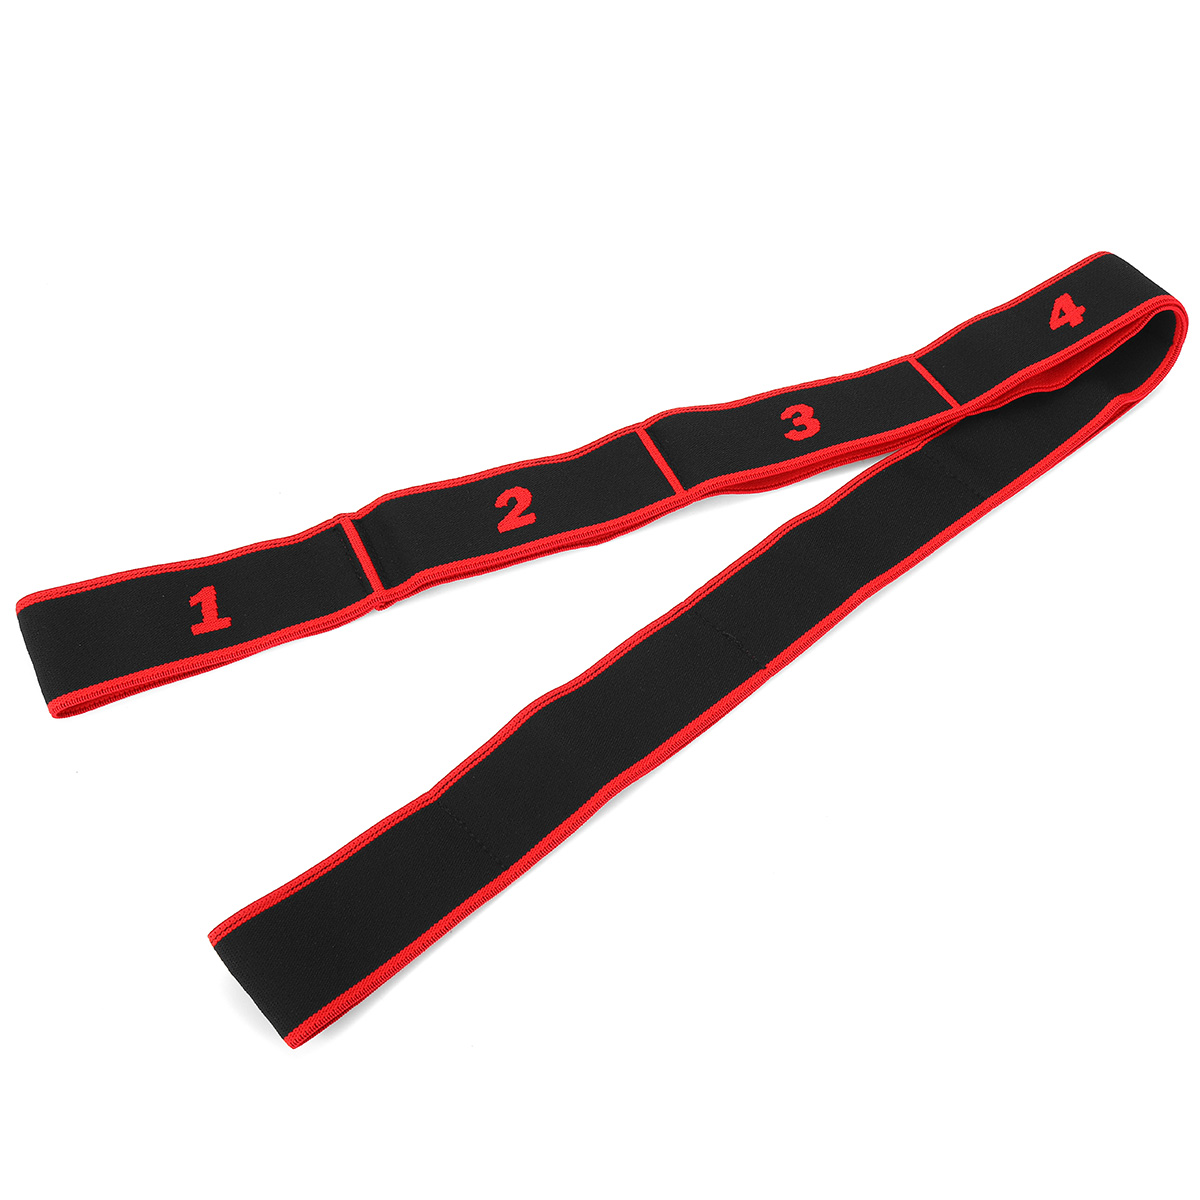 904-CM-Resistance-Bands-Strength-Training-Harness-Exercise-Sport-Fitness-For-Adults-Children-1708045-12